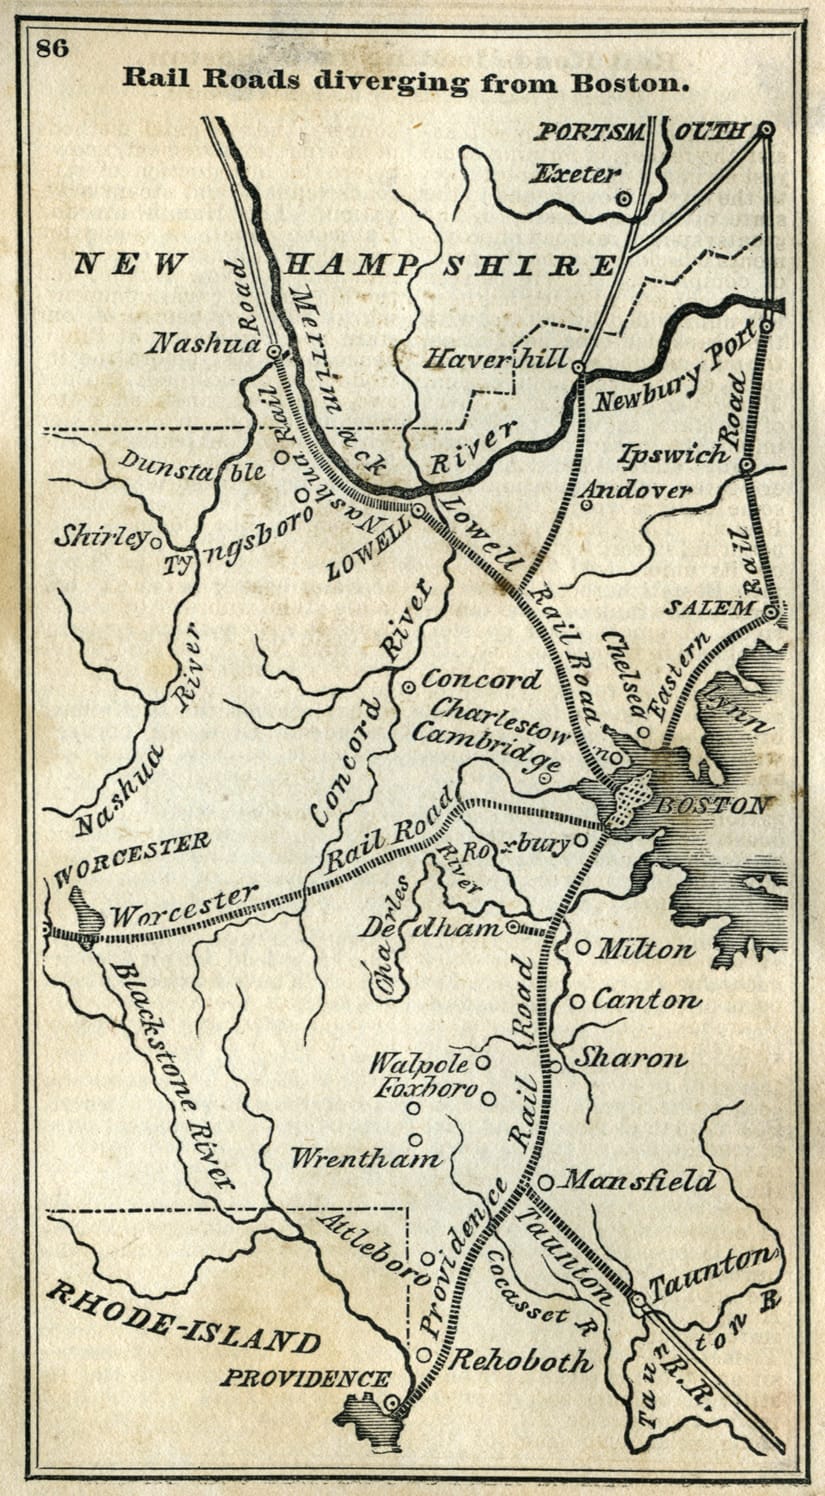 Image of “Railroads Diverging From Boston” from “The Boston Almanac”